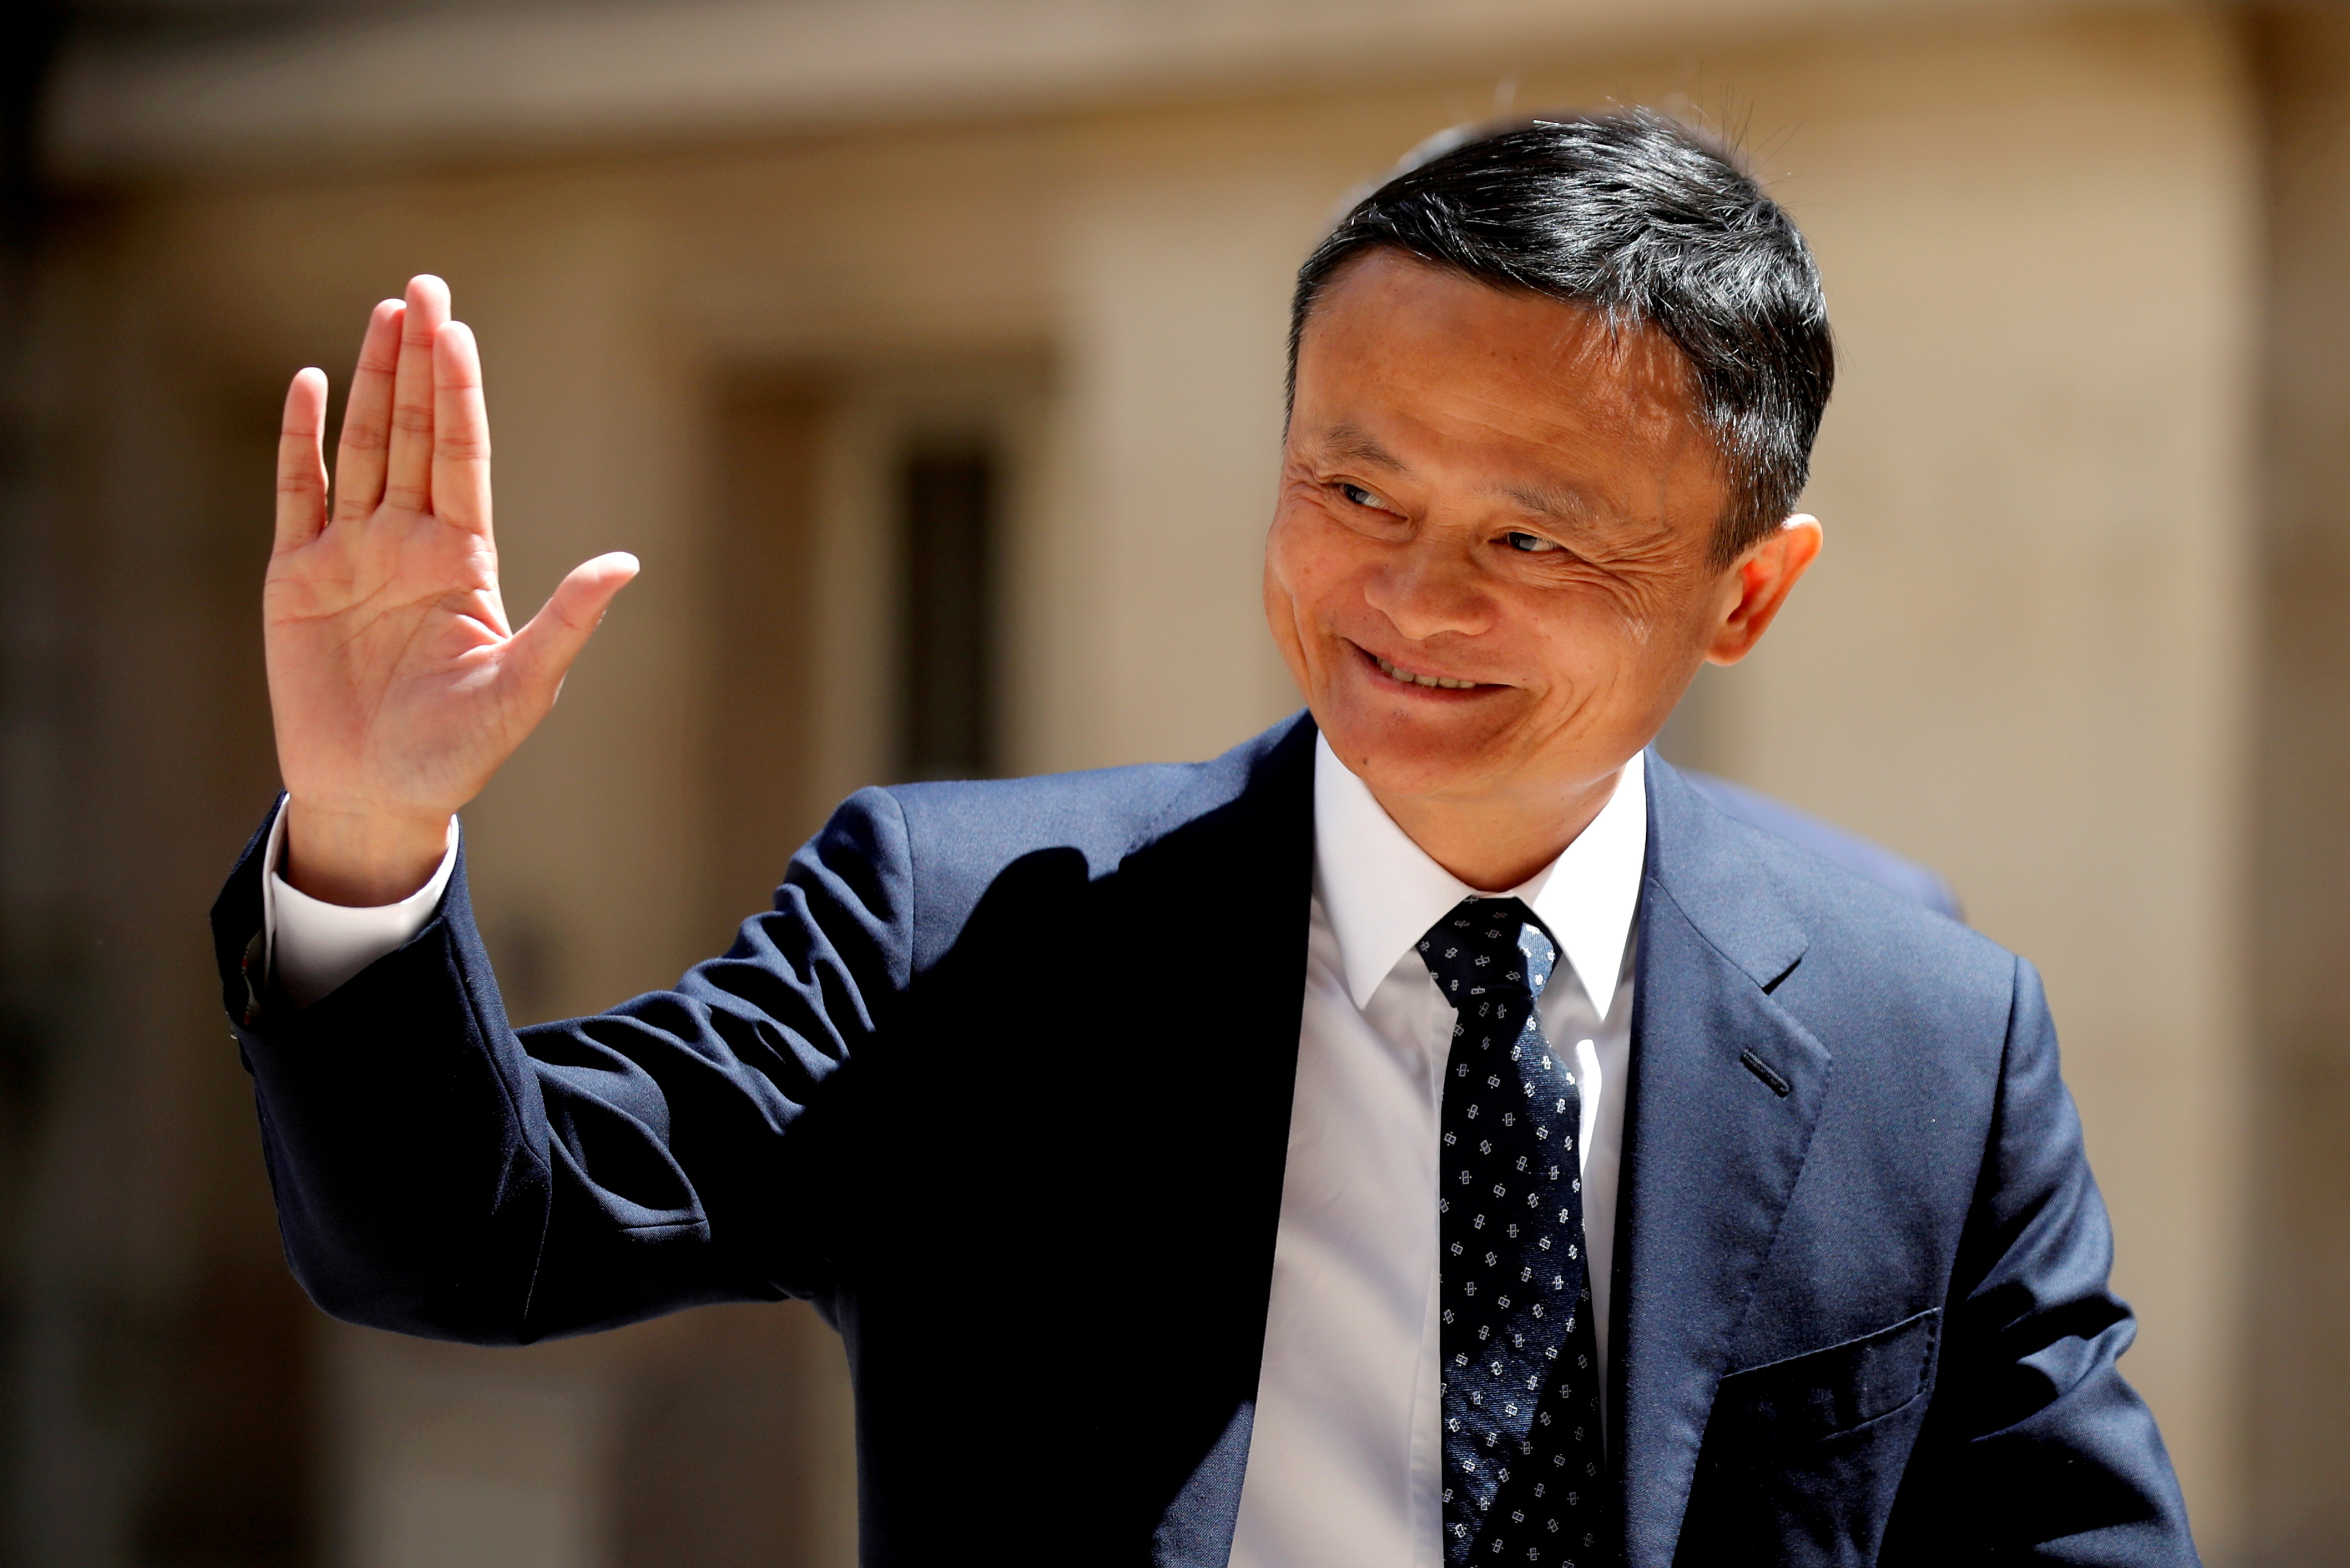 Jack Ma, billionaire founder of Alibaba Group, arrives at the 